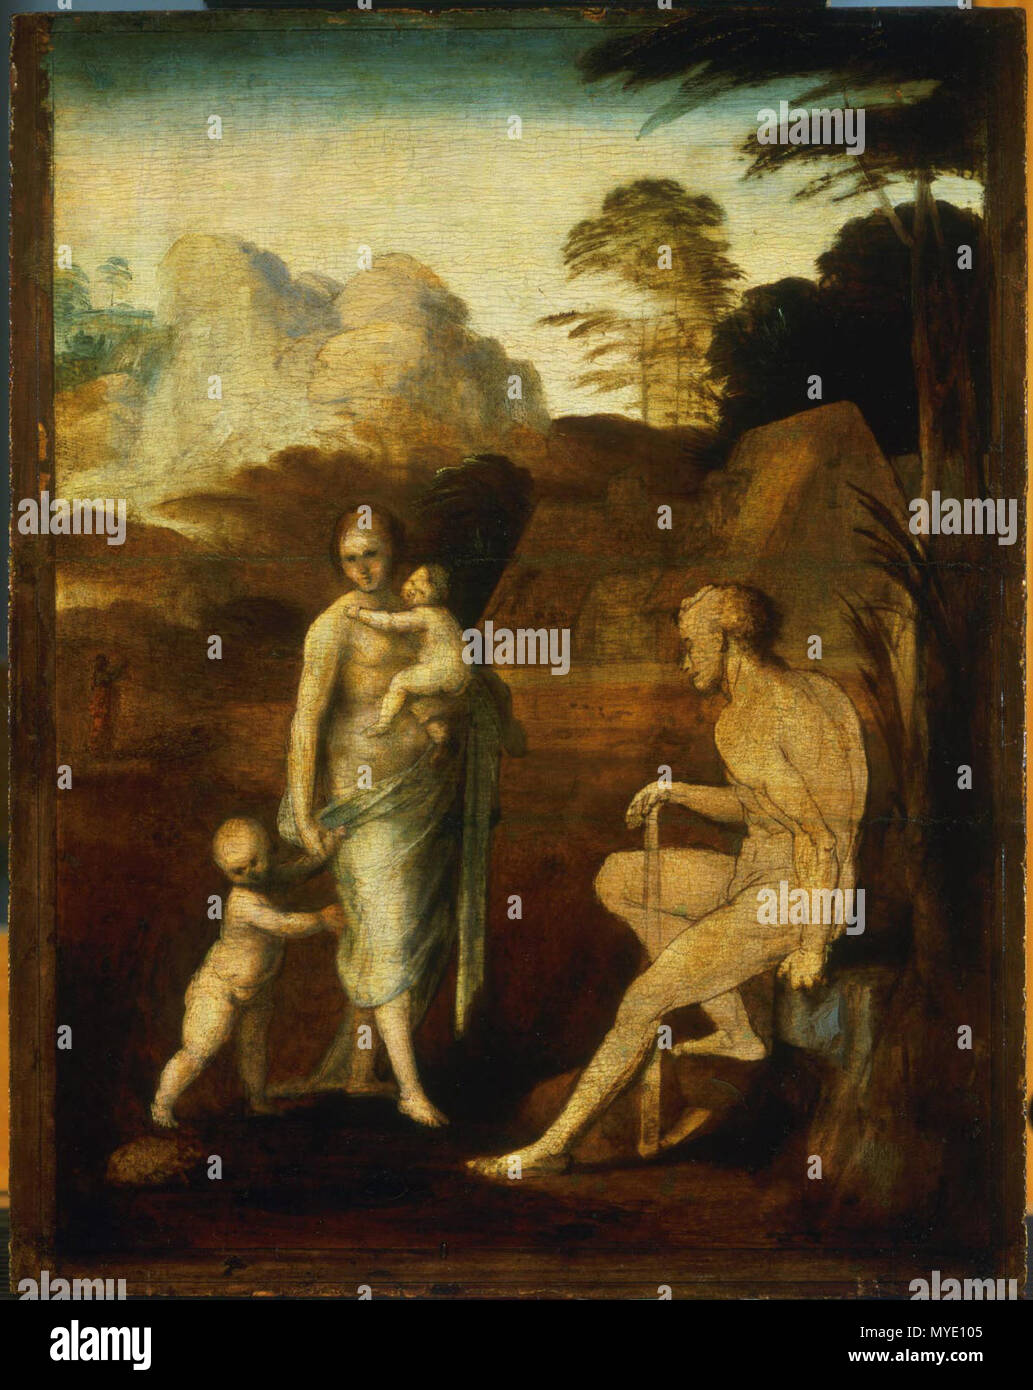 Adam And Eve With Cain And Abel English Adam And Eve With Cain